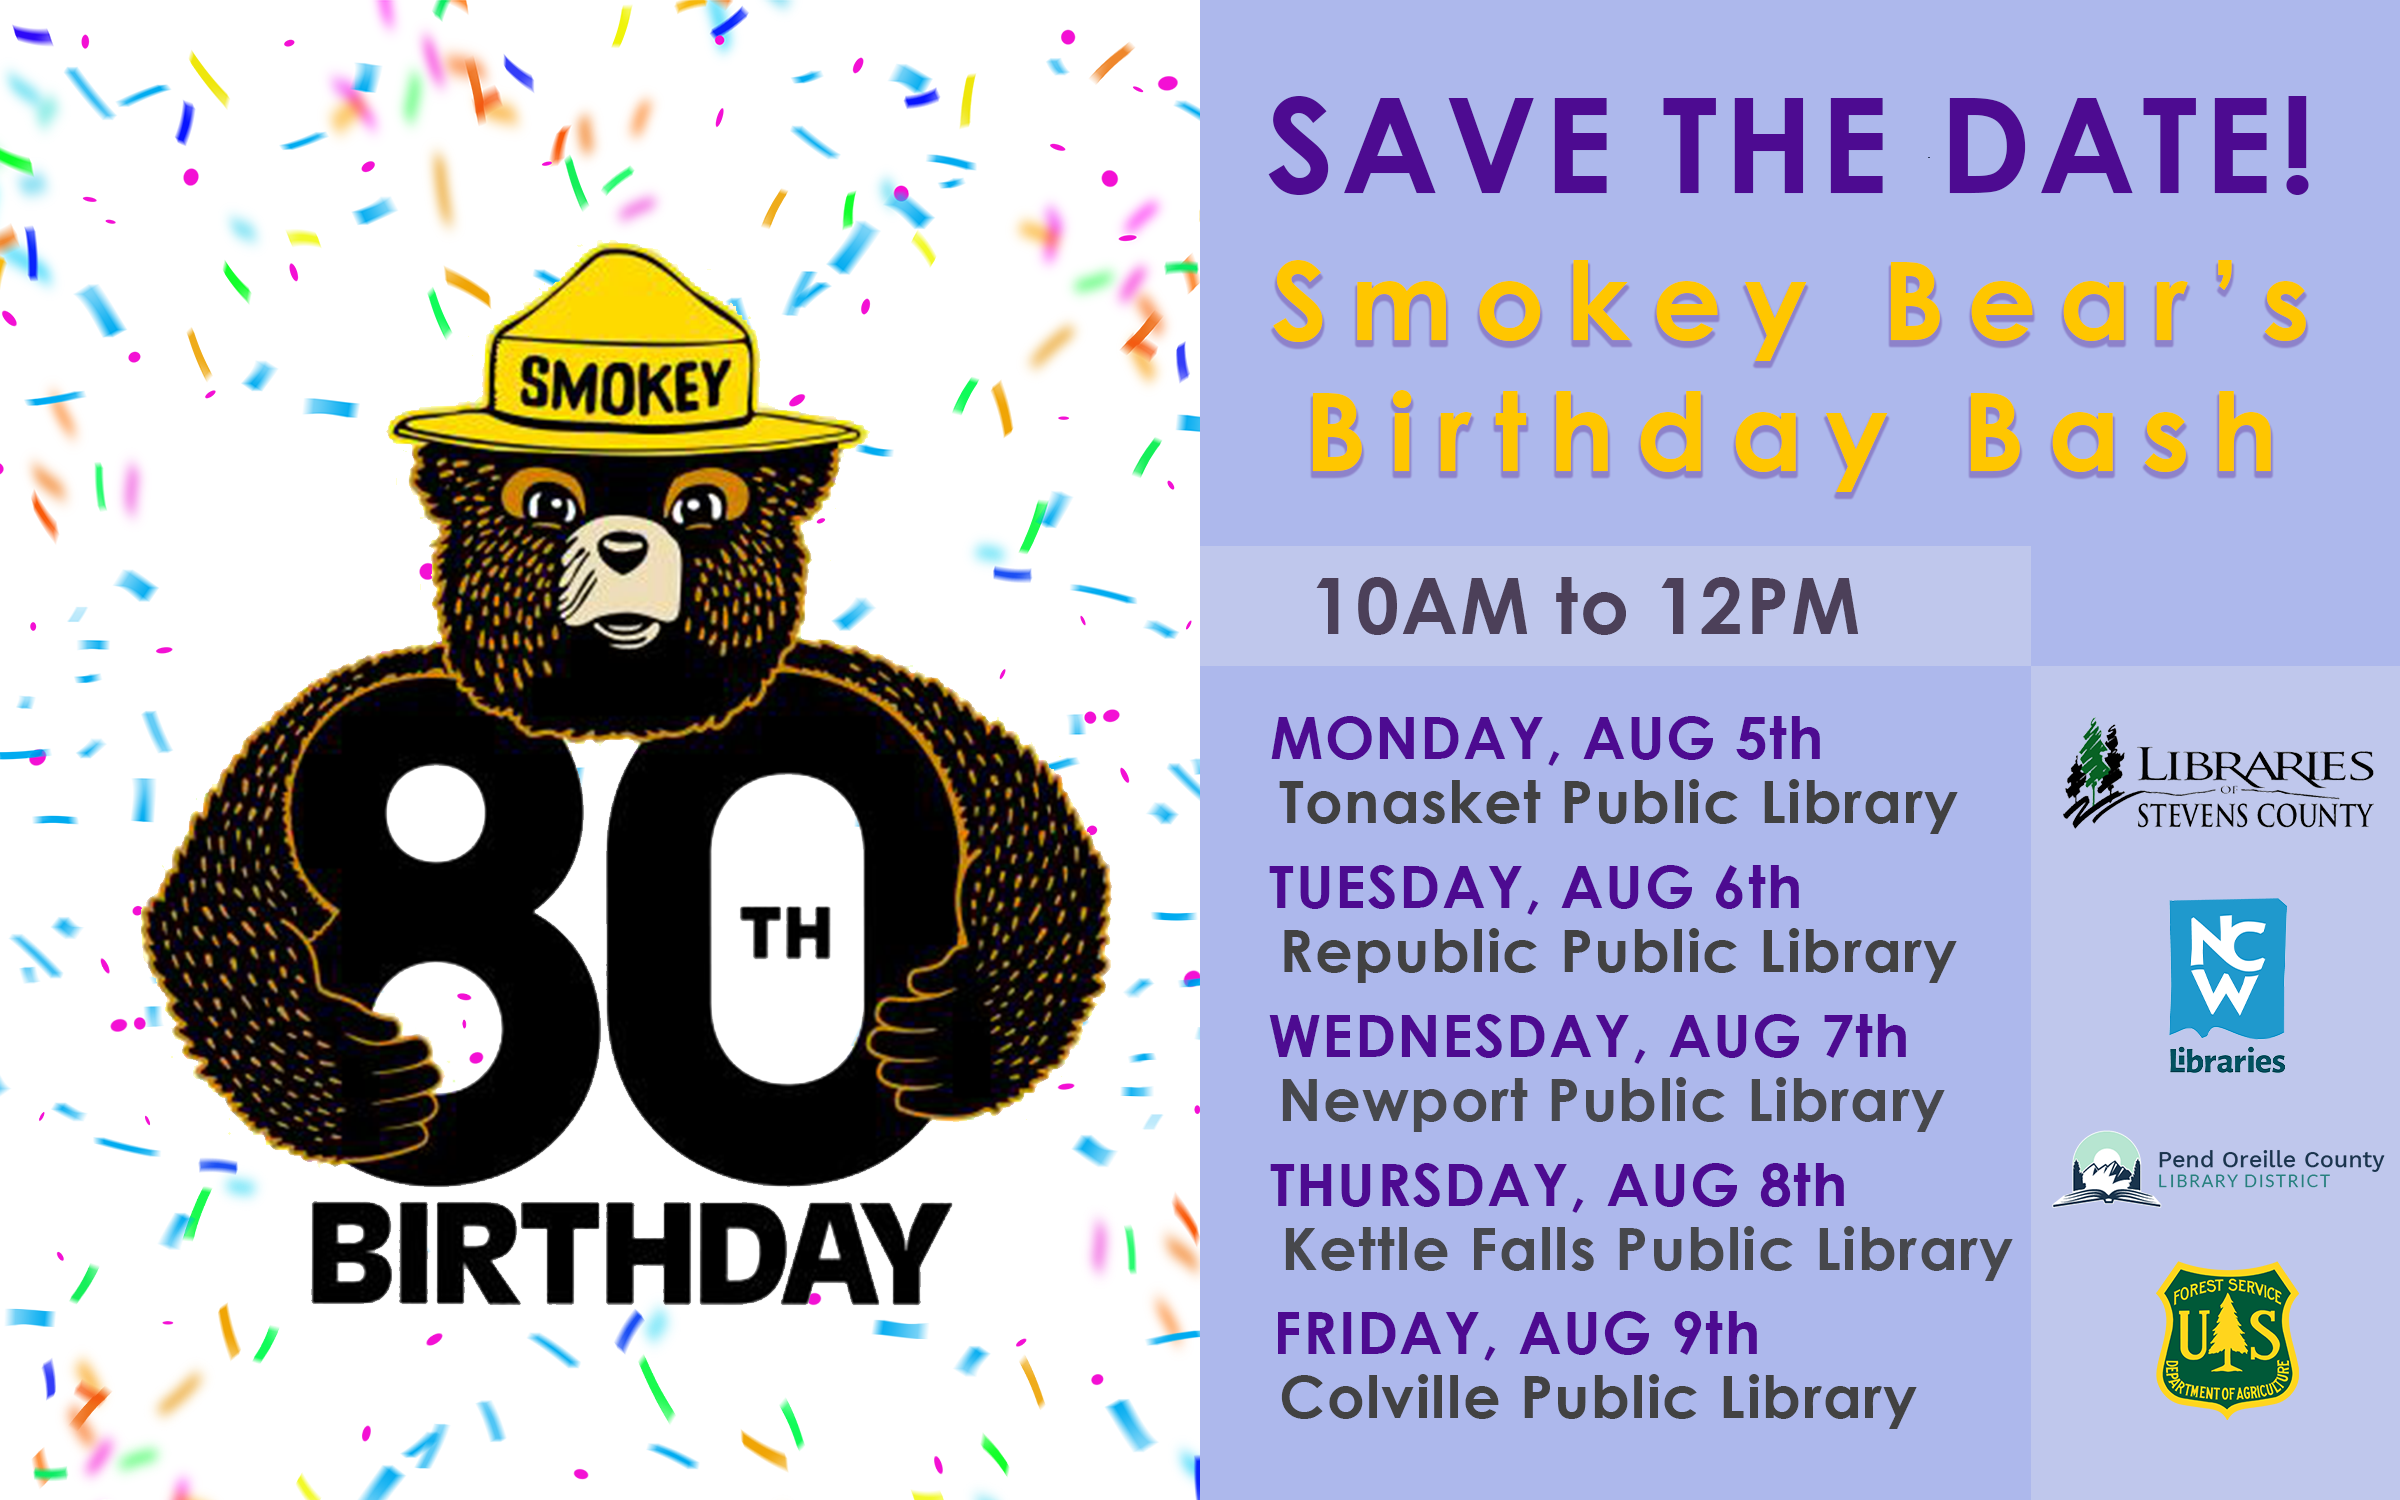 Smokey Bear with a large 80 along with dates for the events